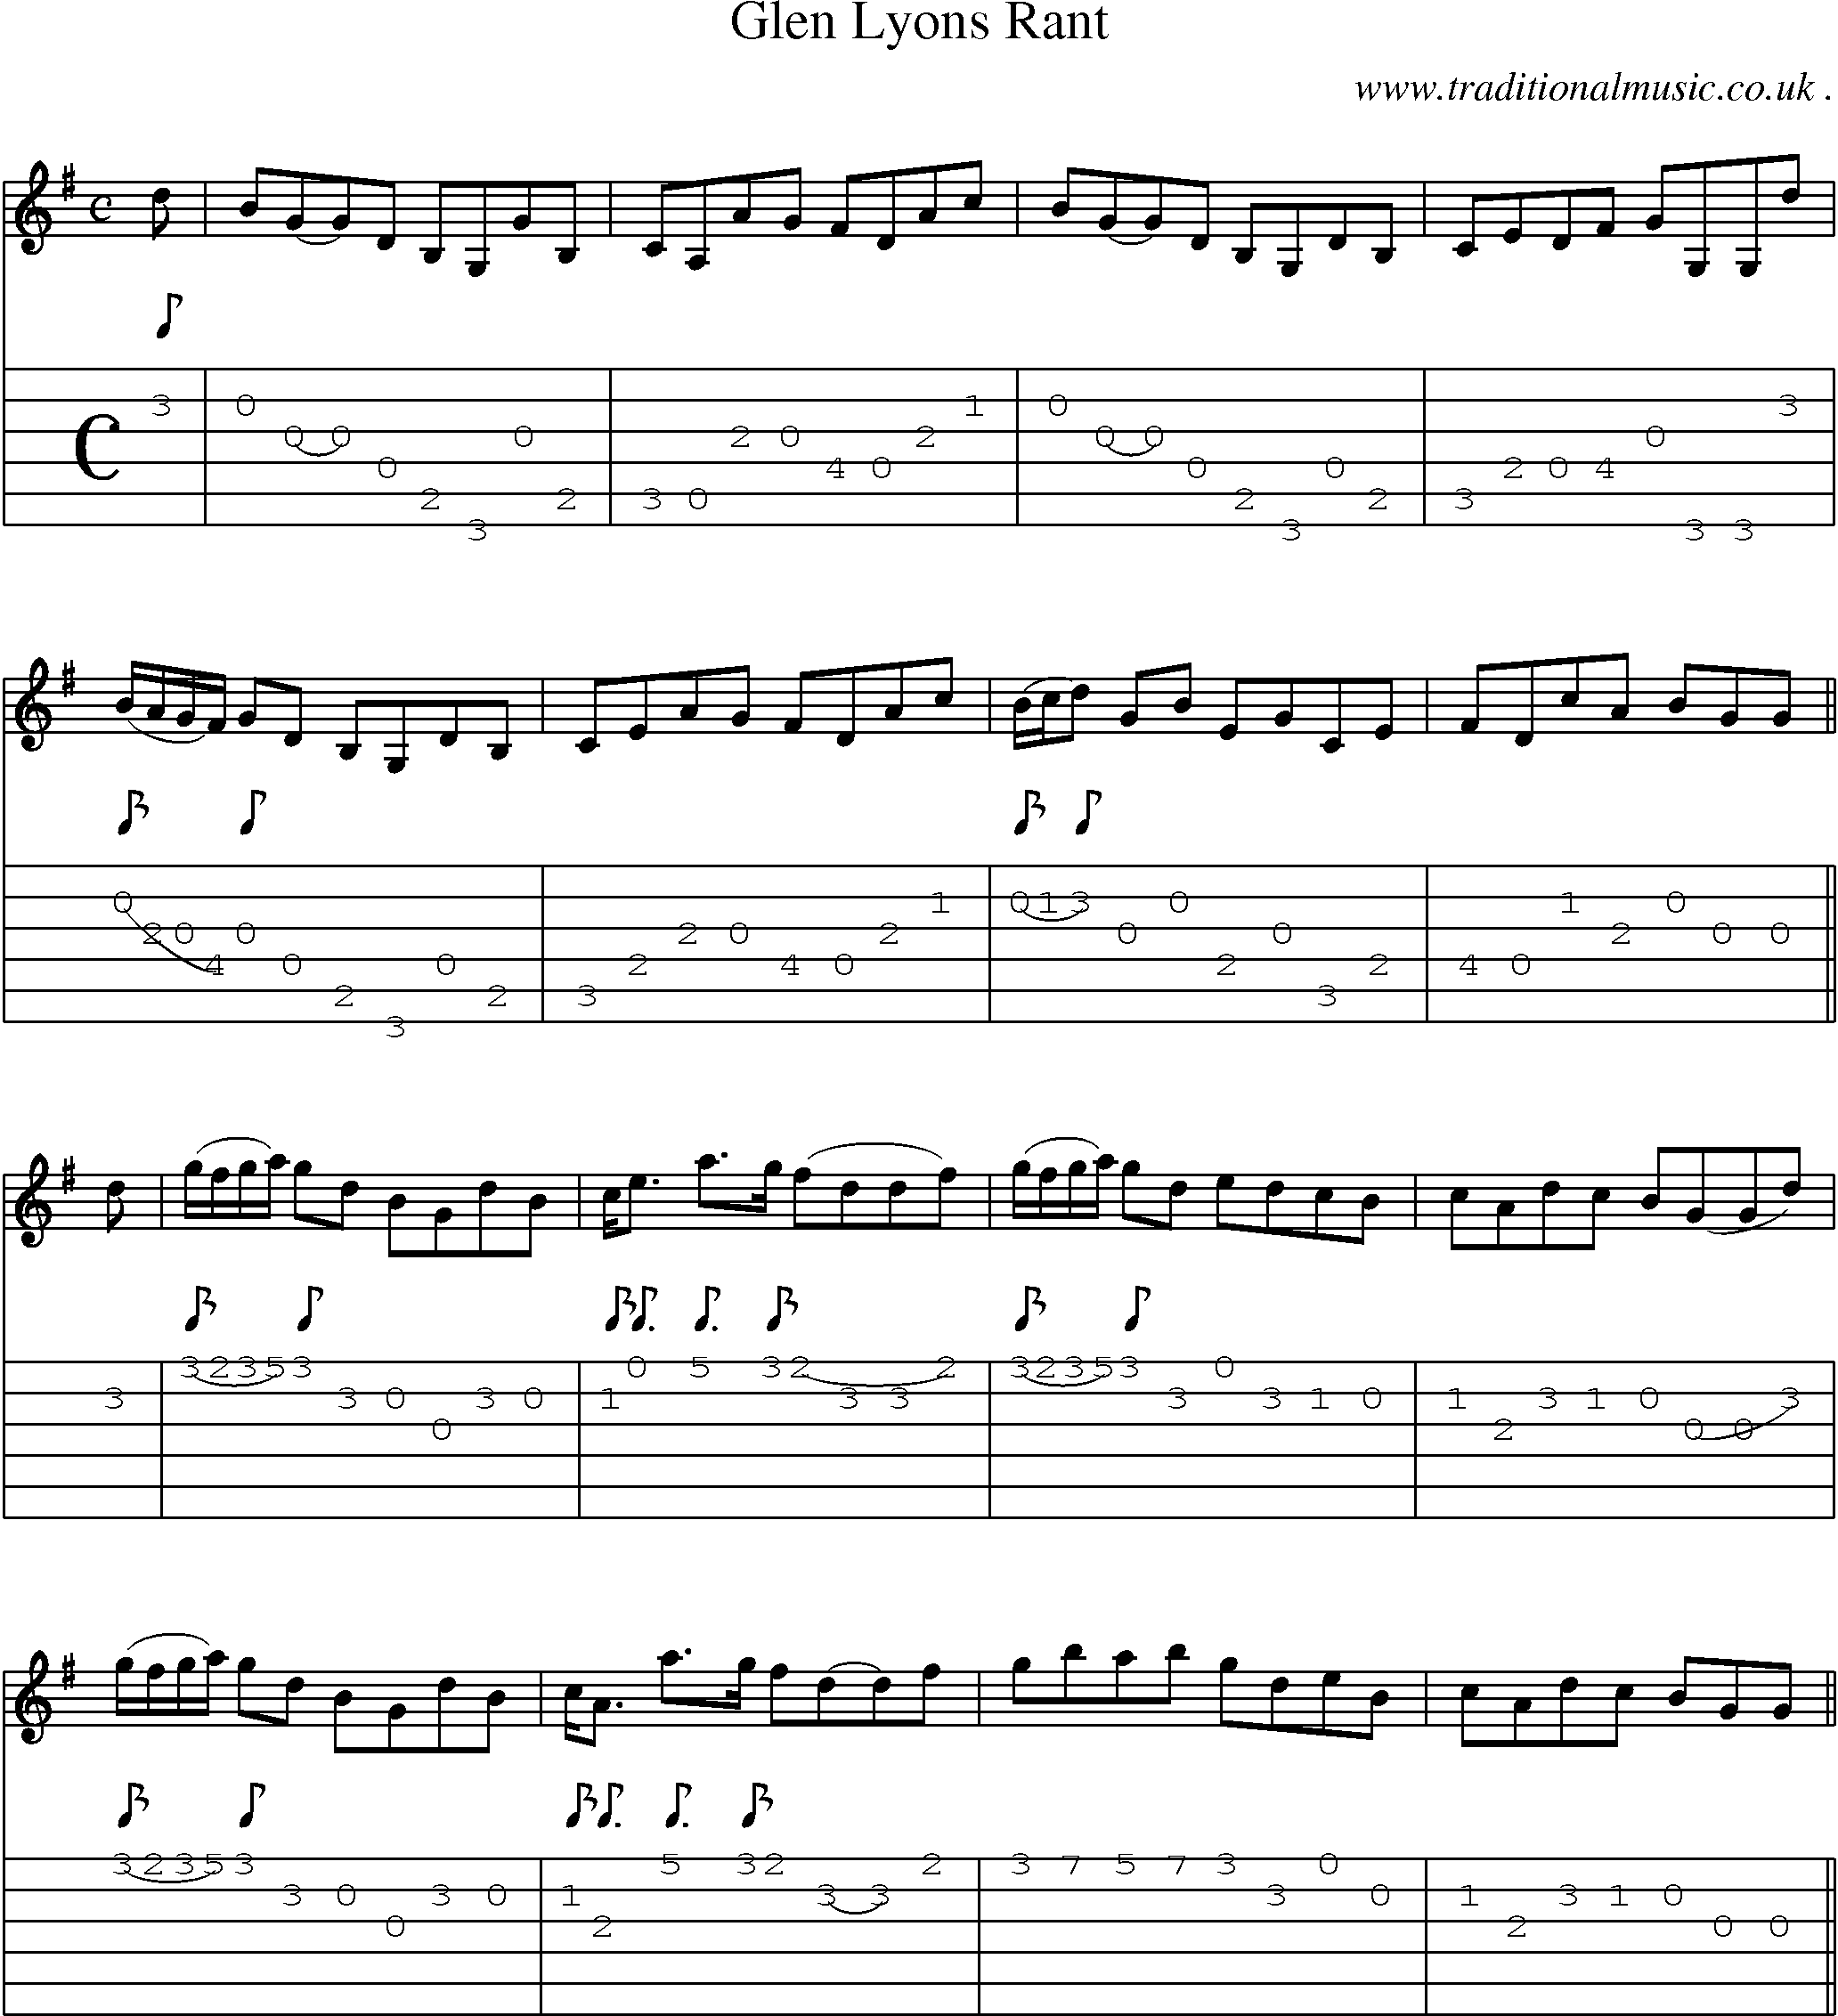 Sheet-music  score, Chords and Guitar Tabs for Glen Lyons Rant